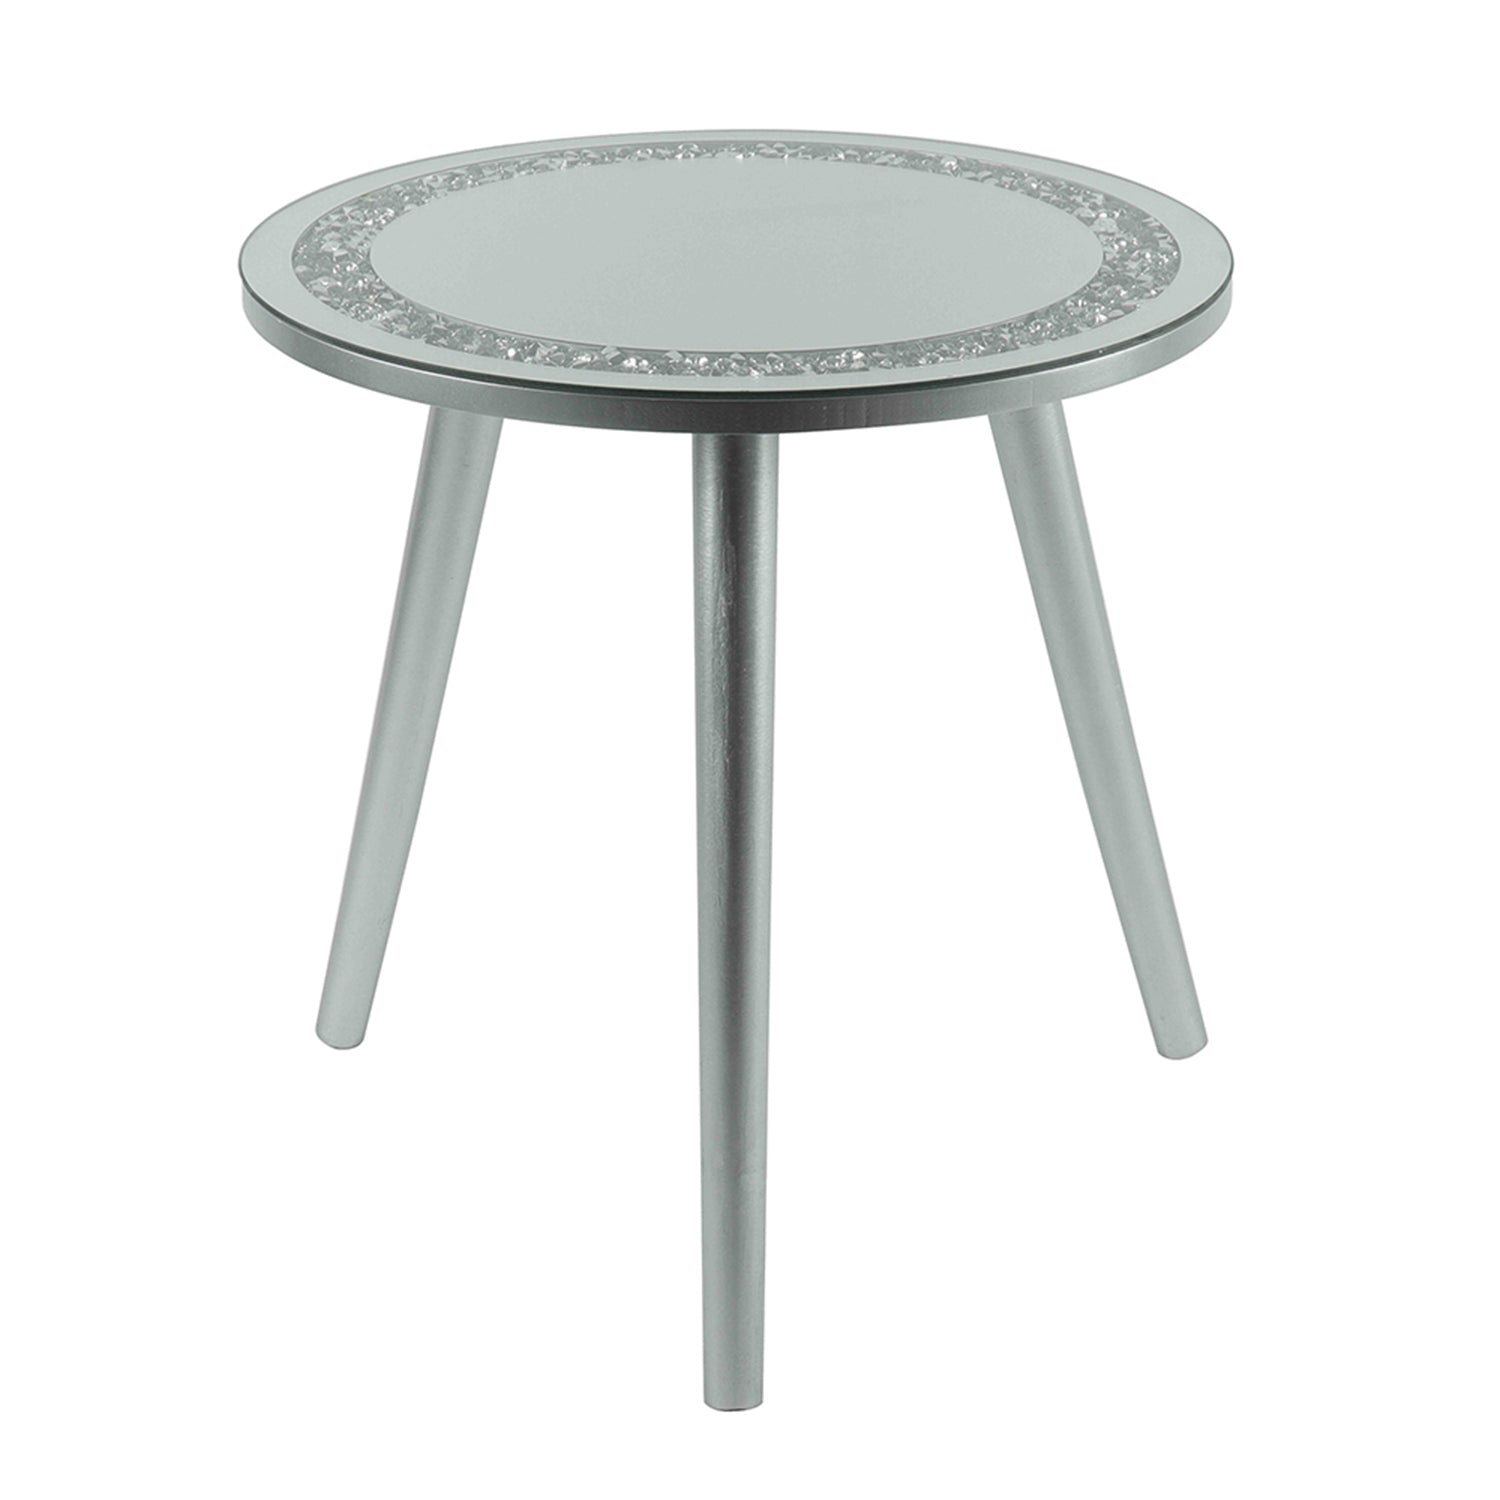 Mirrored Glass MultiCrystal Round Side Table 38x38x40cm